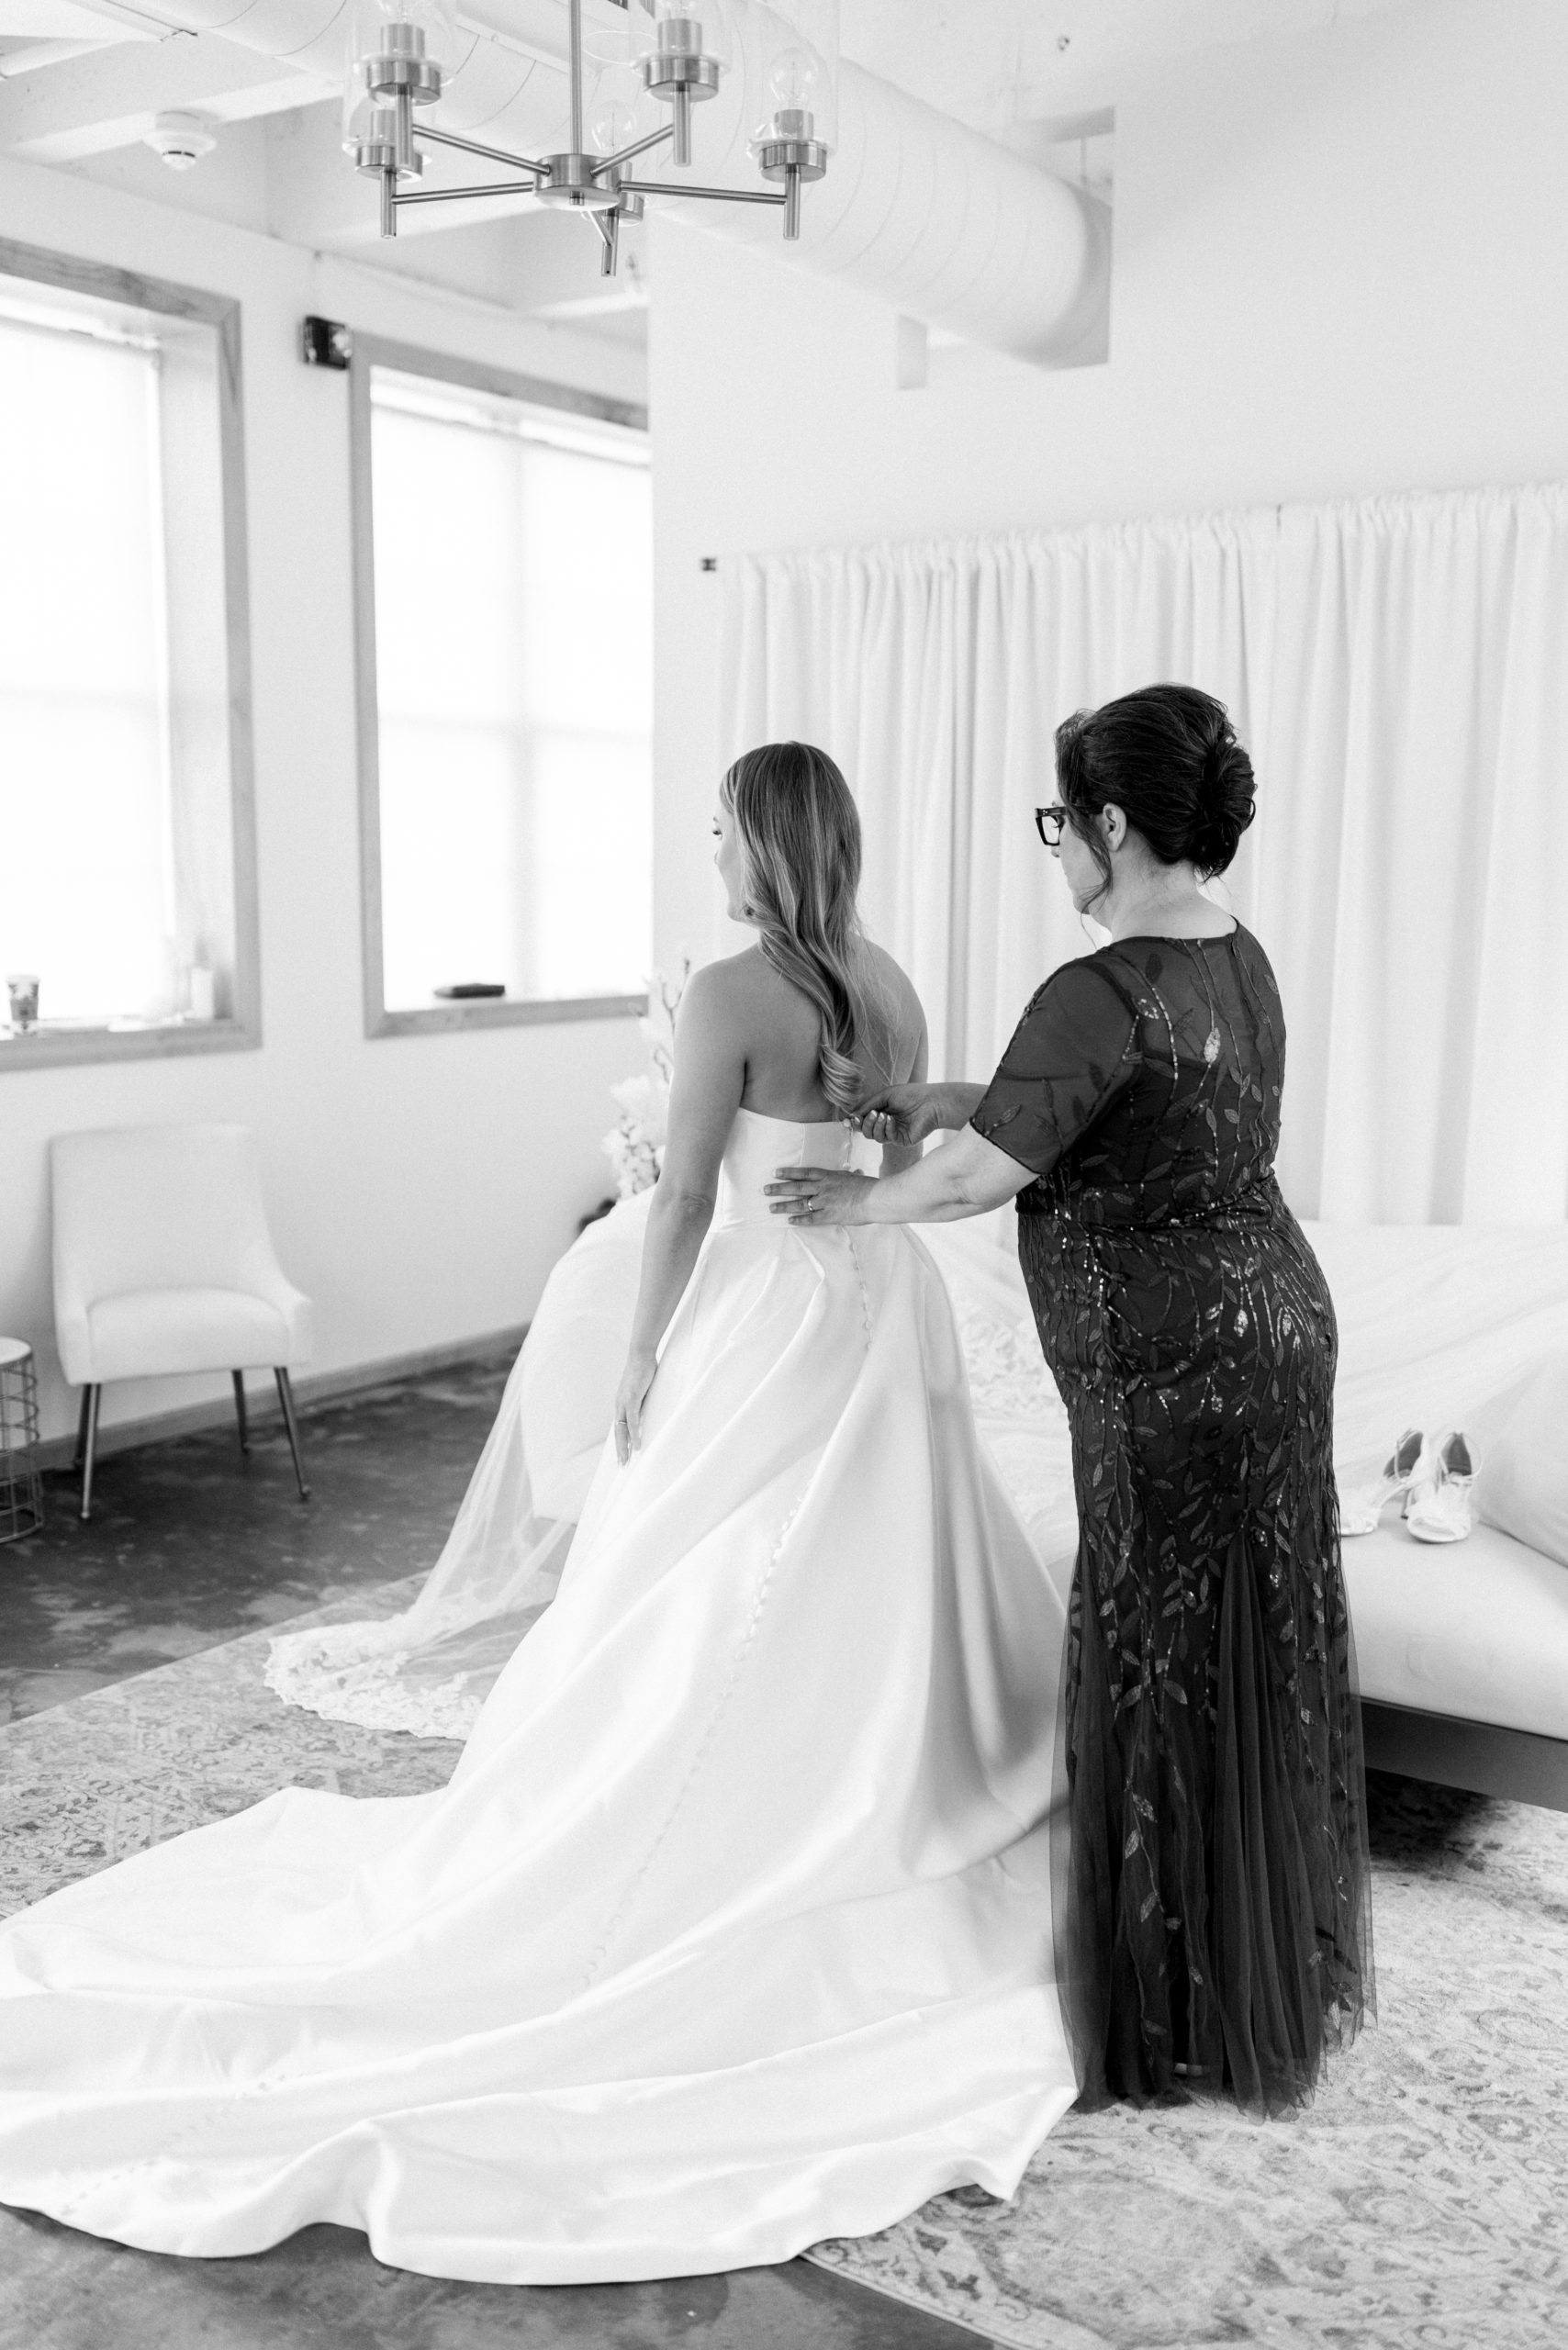 Mom helping Bride get into gown